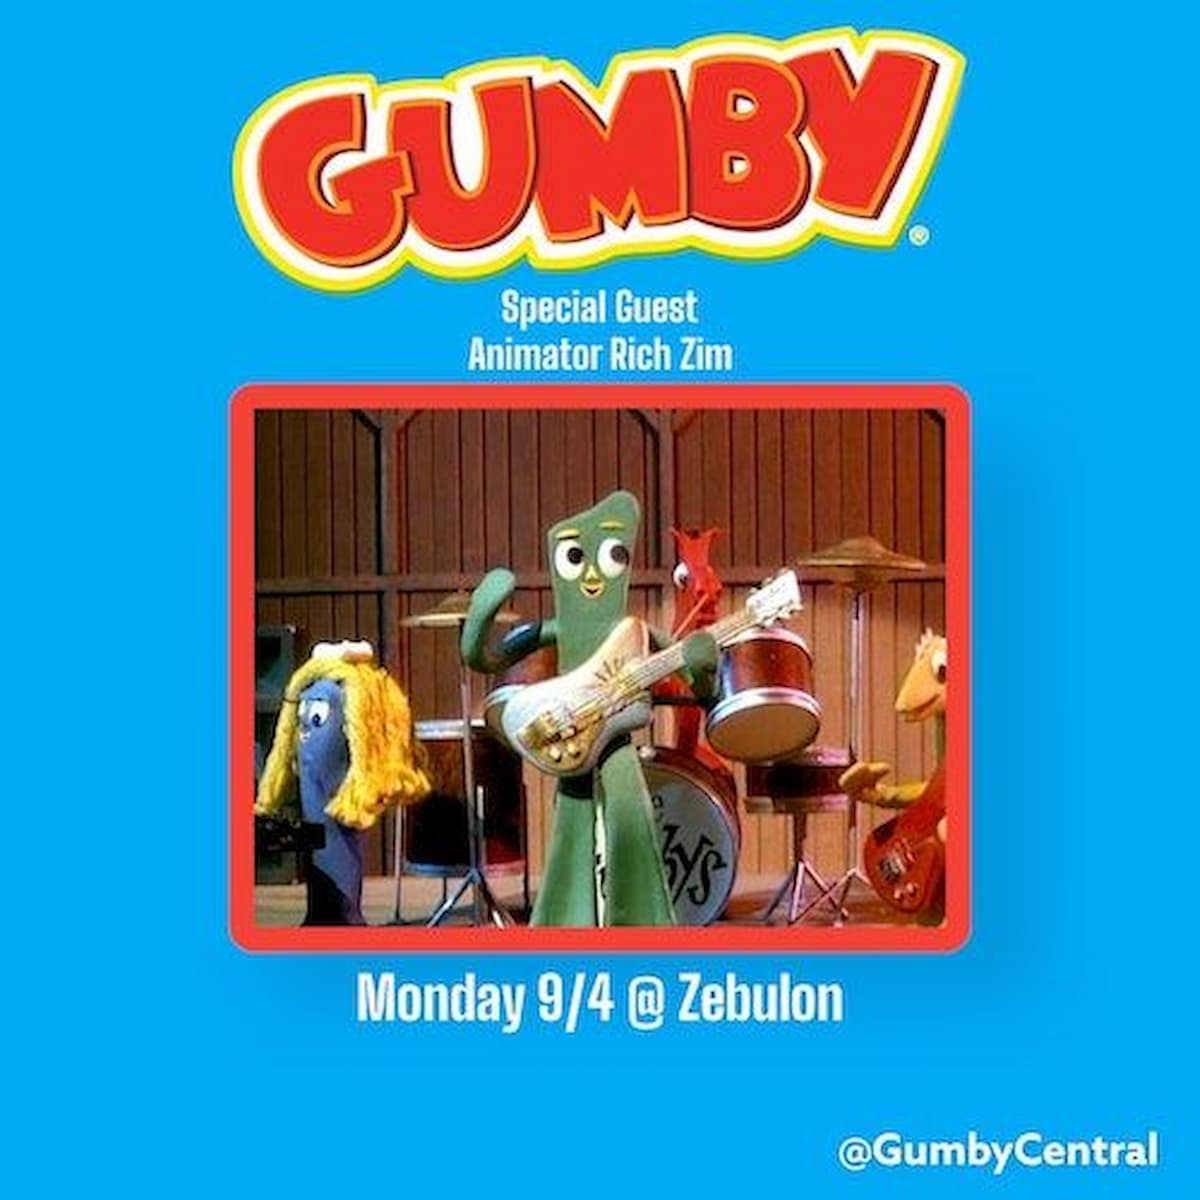 Gumby Central